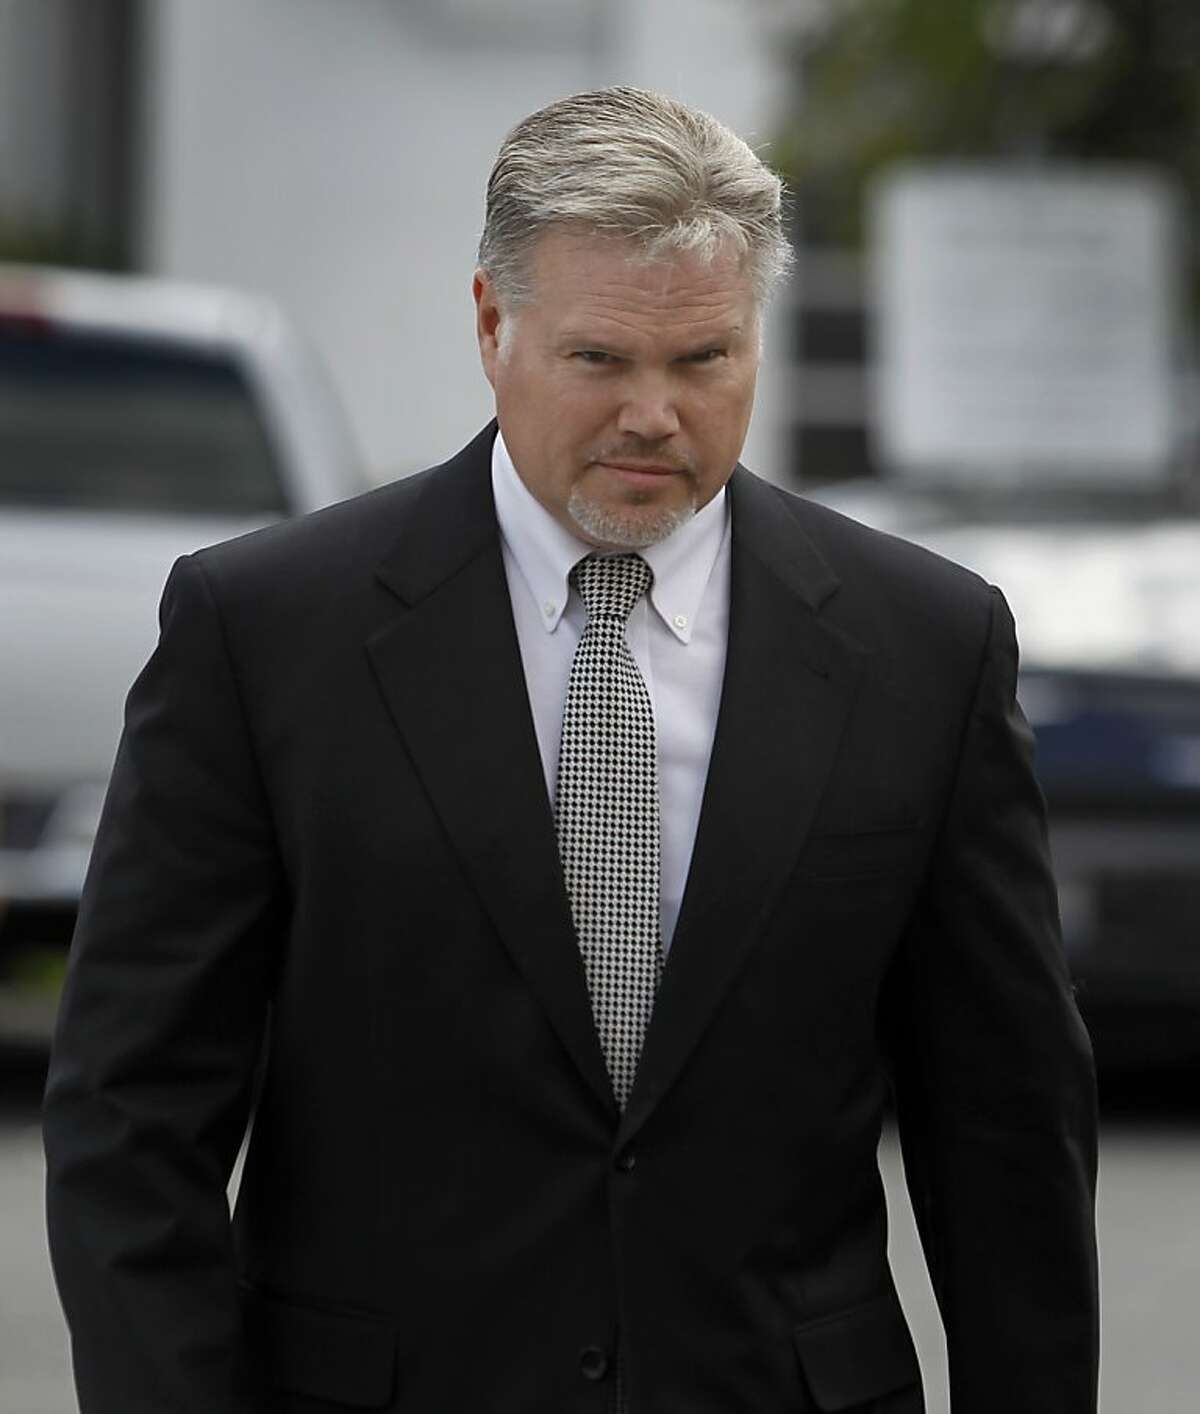 Private investigator Christopher Butler arrives for a hearing at Contra Costa County Superior Court in Walnut Creek, Calif. on Thursday, April 21, 2011. Prosecutors allege that Butler resold illegal drugs that were stolen from evidence lockers by Norman Wielsch.